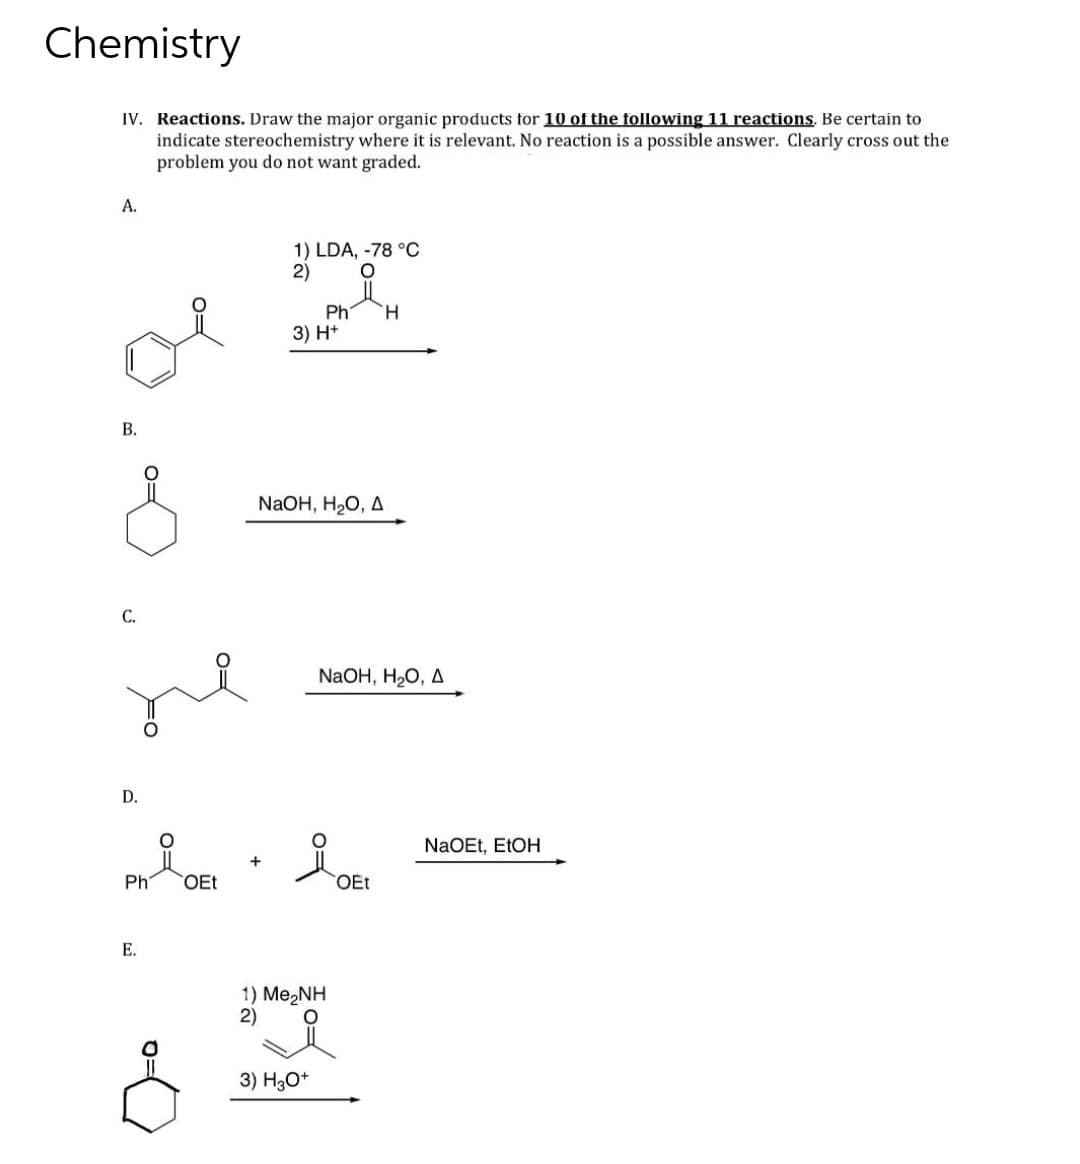 Chemistry
IV. Reactions. Draw the major organic products for 10 of the following 11 reactions. Be certain to
indicate stereochemistry where it is relevant. No reaction is a possible answer. Clearly cross out the
problem you do not want graded.
A.
B.
C.
D.
Ph
E.
O
OEt
1) LDA, -78 °C
O
2)
Ph H
3) H+
NaOH, H₂O, A
NaOH, H₂O, A
1) Me,NH
2)
3) H3O+
OEt
NaOEt, EtOH